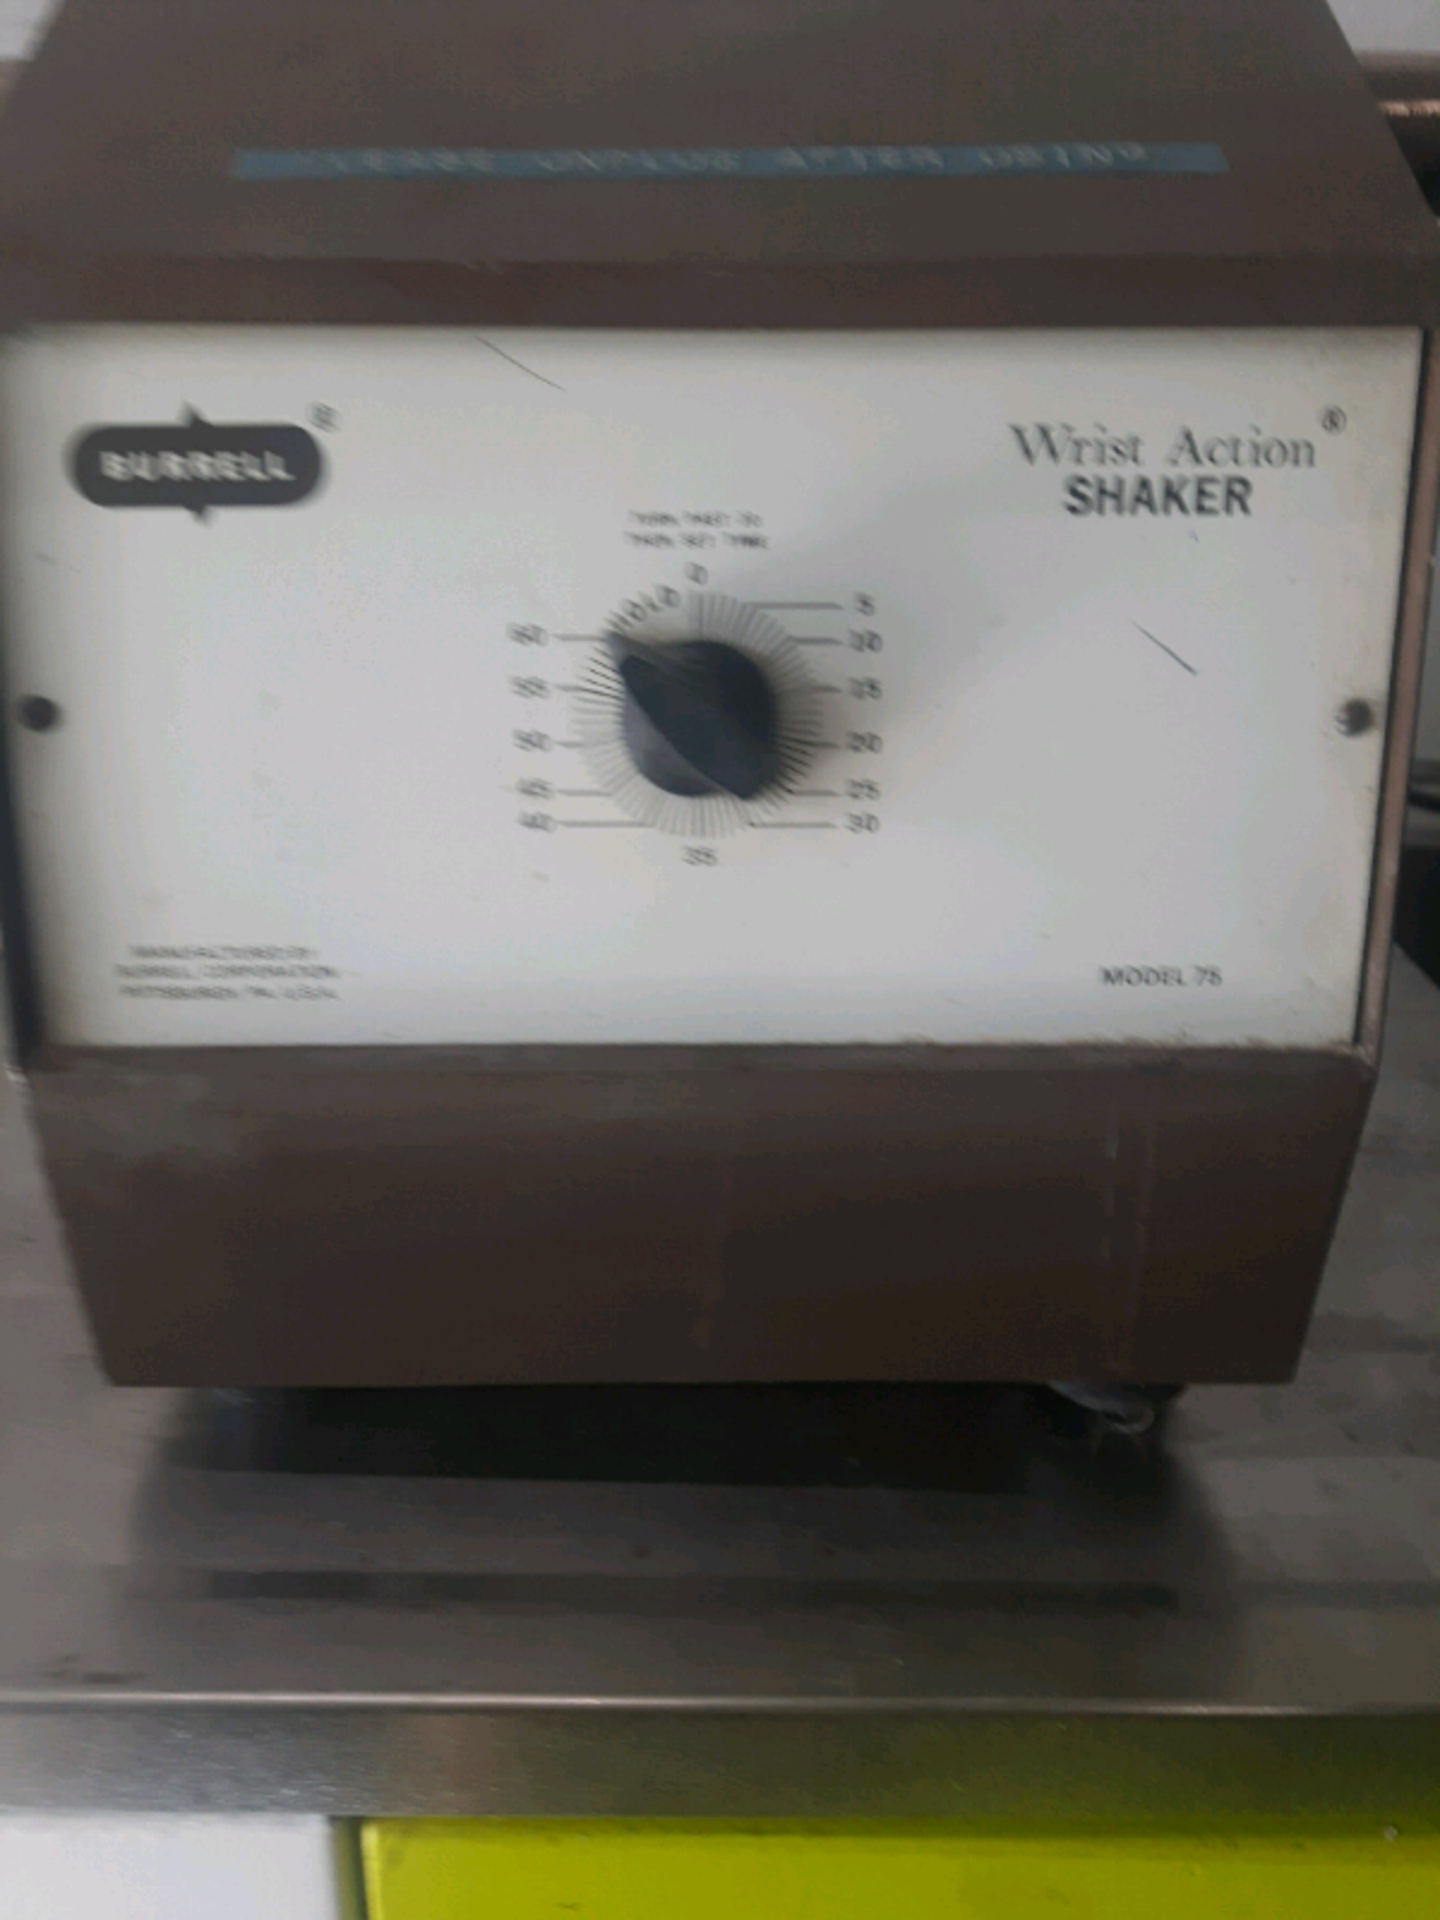 BURRELL LABRATORY WRIST ACTION SHAKER, MDL. 75, 110V, 2.4 AMPS - LOCATION - LONDON, ONTARIO - Image 2 of 3